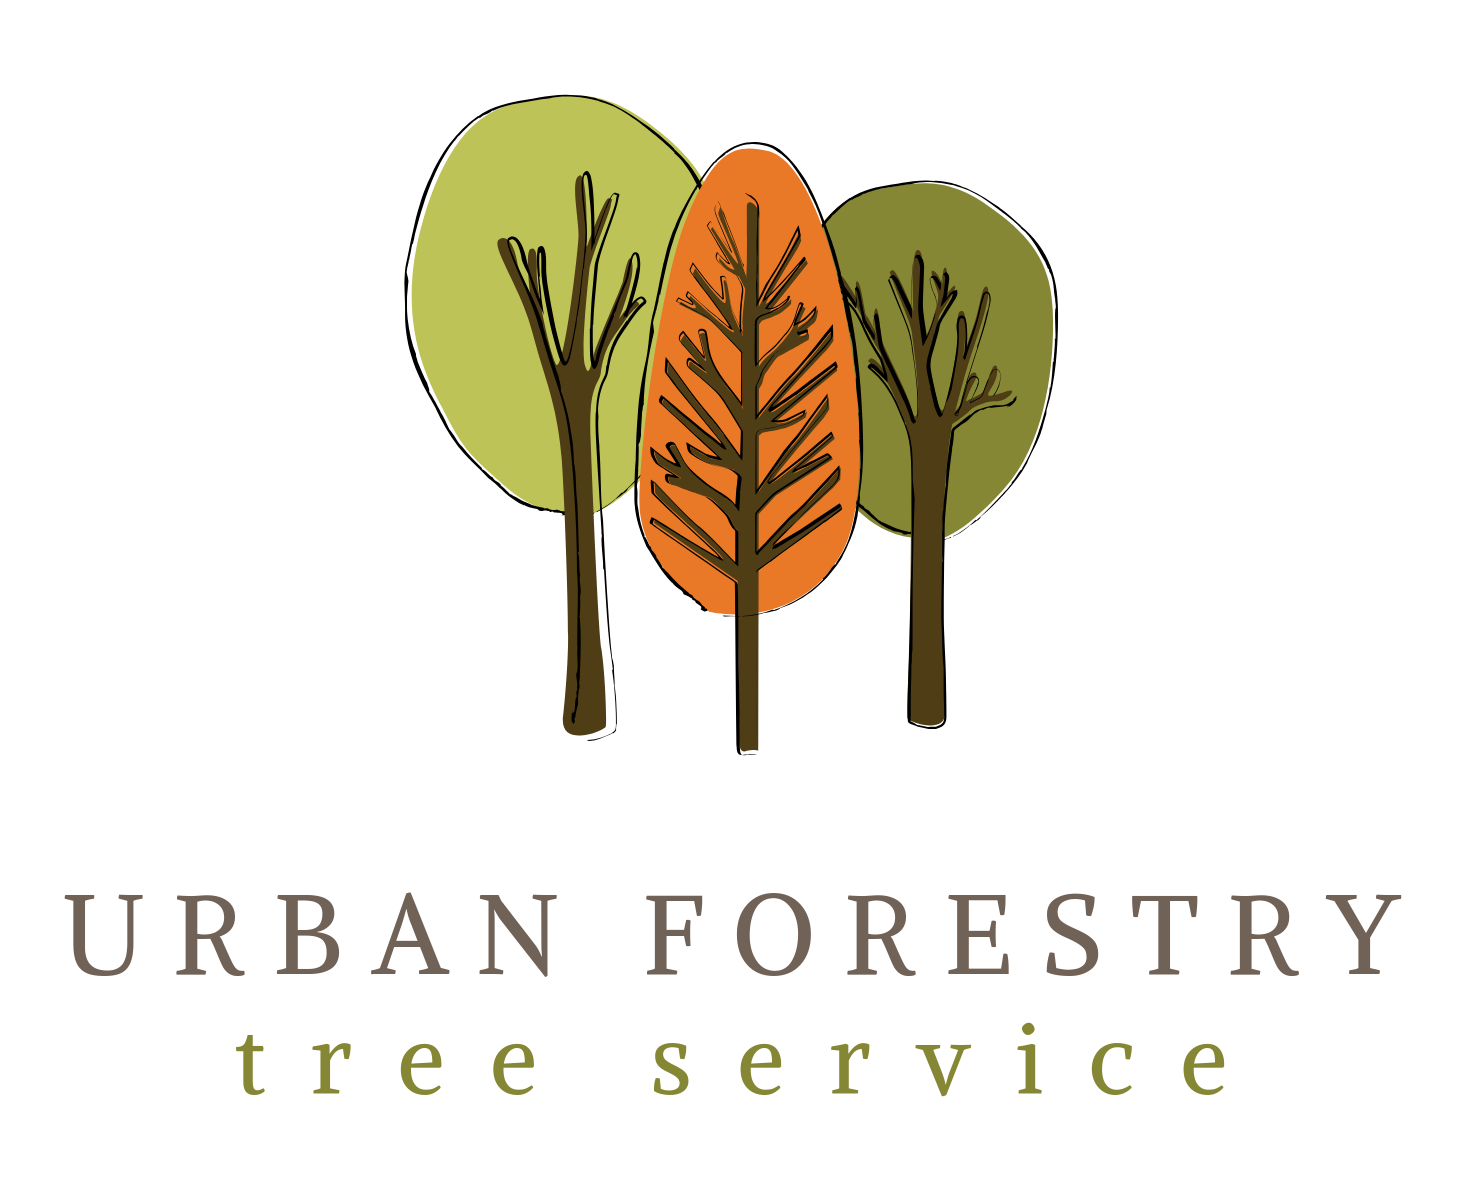 Urban Forestry Tree Service (1)